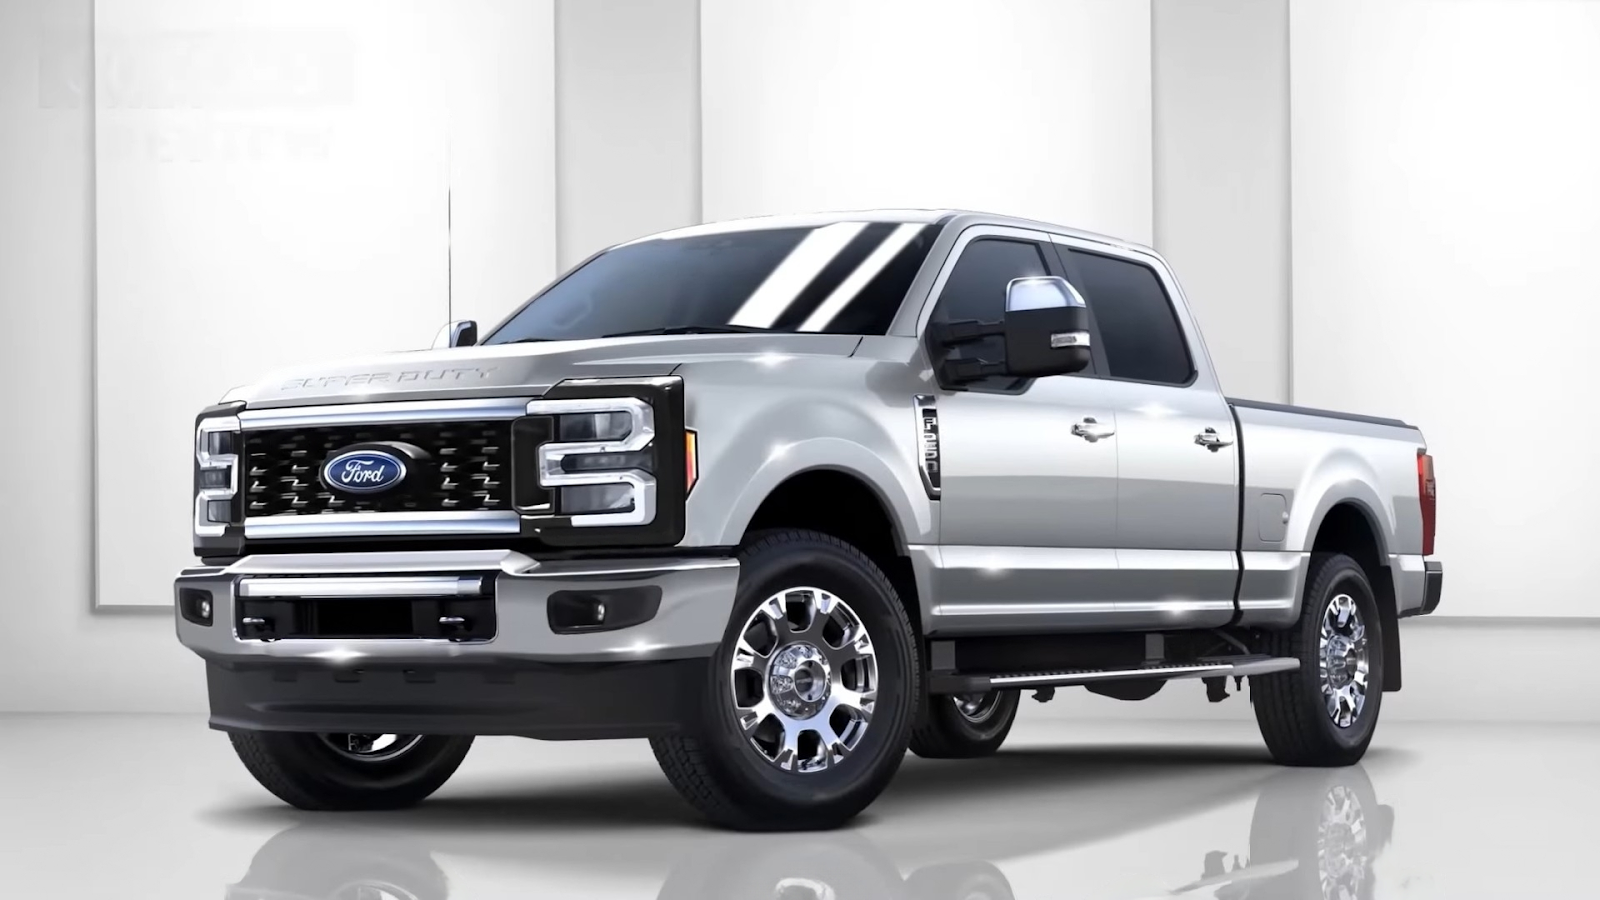 2025 Ford Super Duty Release Date, Price And Performance